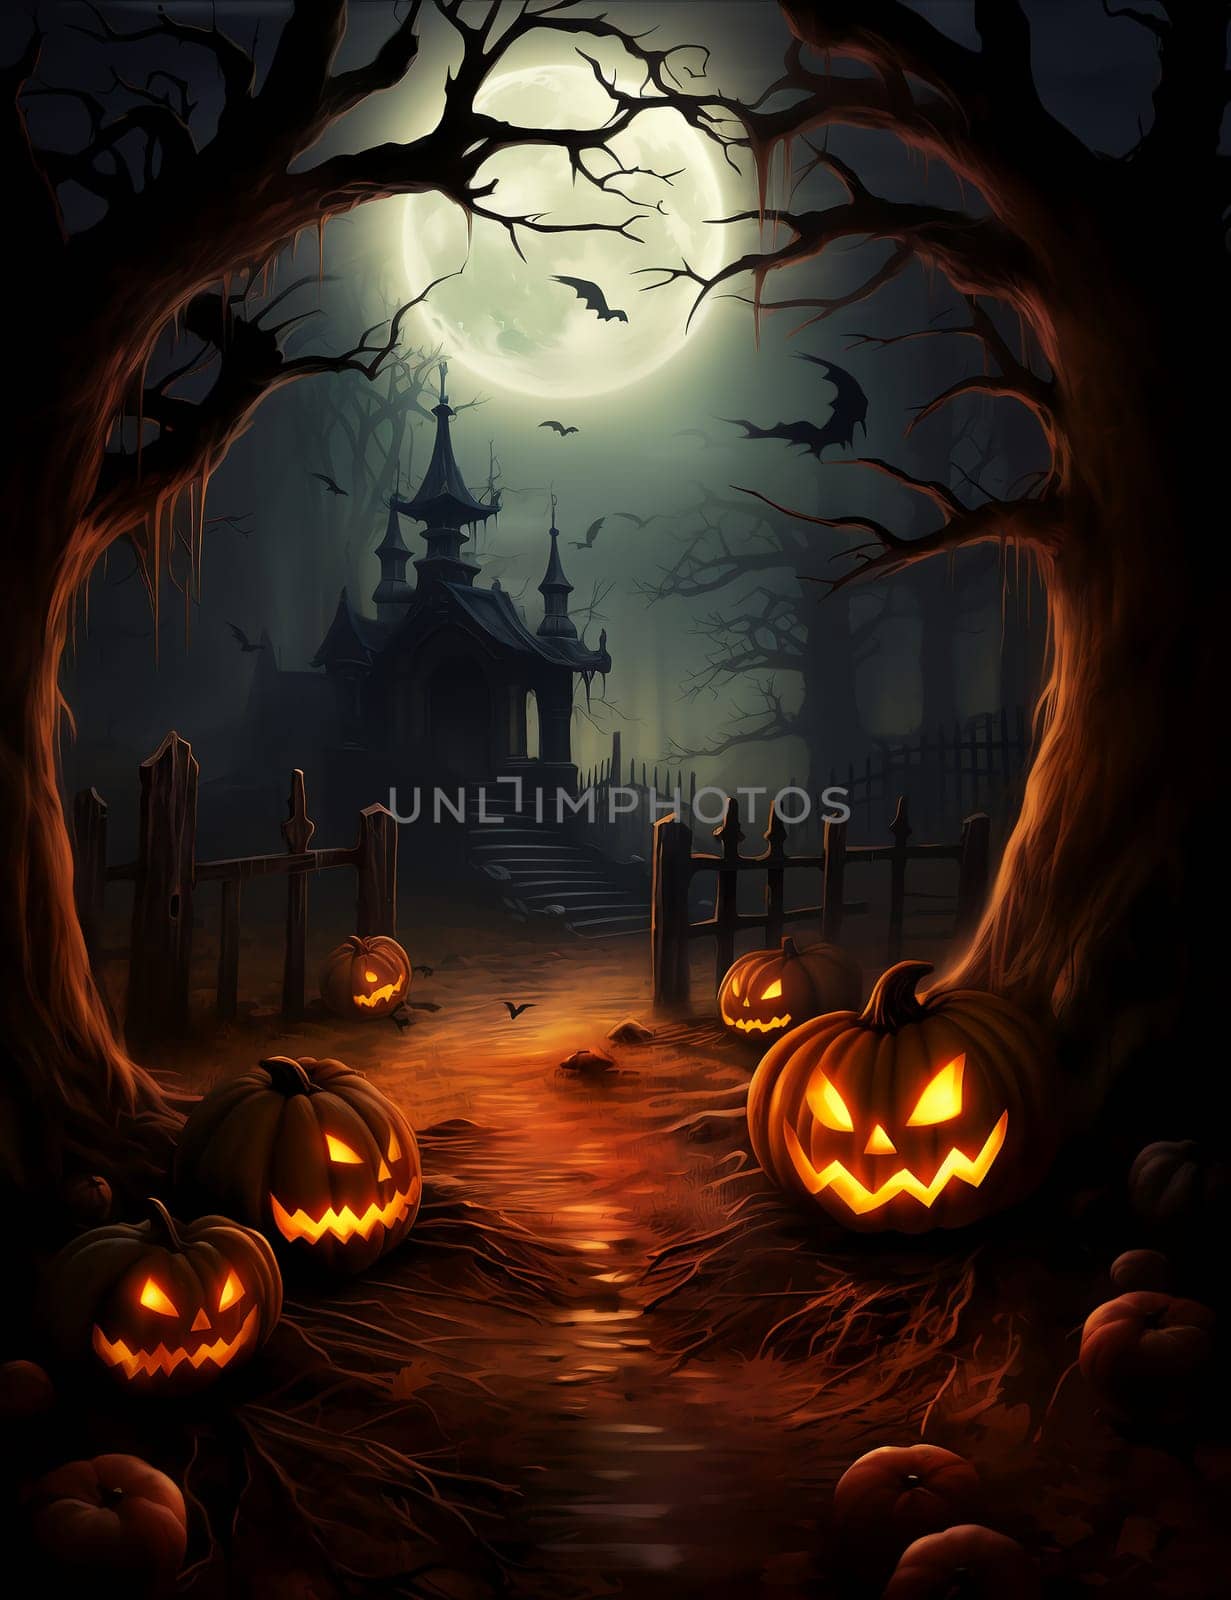 Spooky Halloween illustration, with a creepy house and pumpkins on the steps. by AndreyKENO